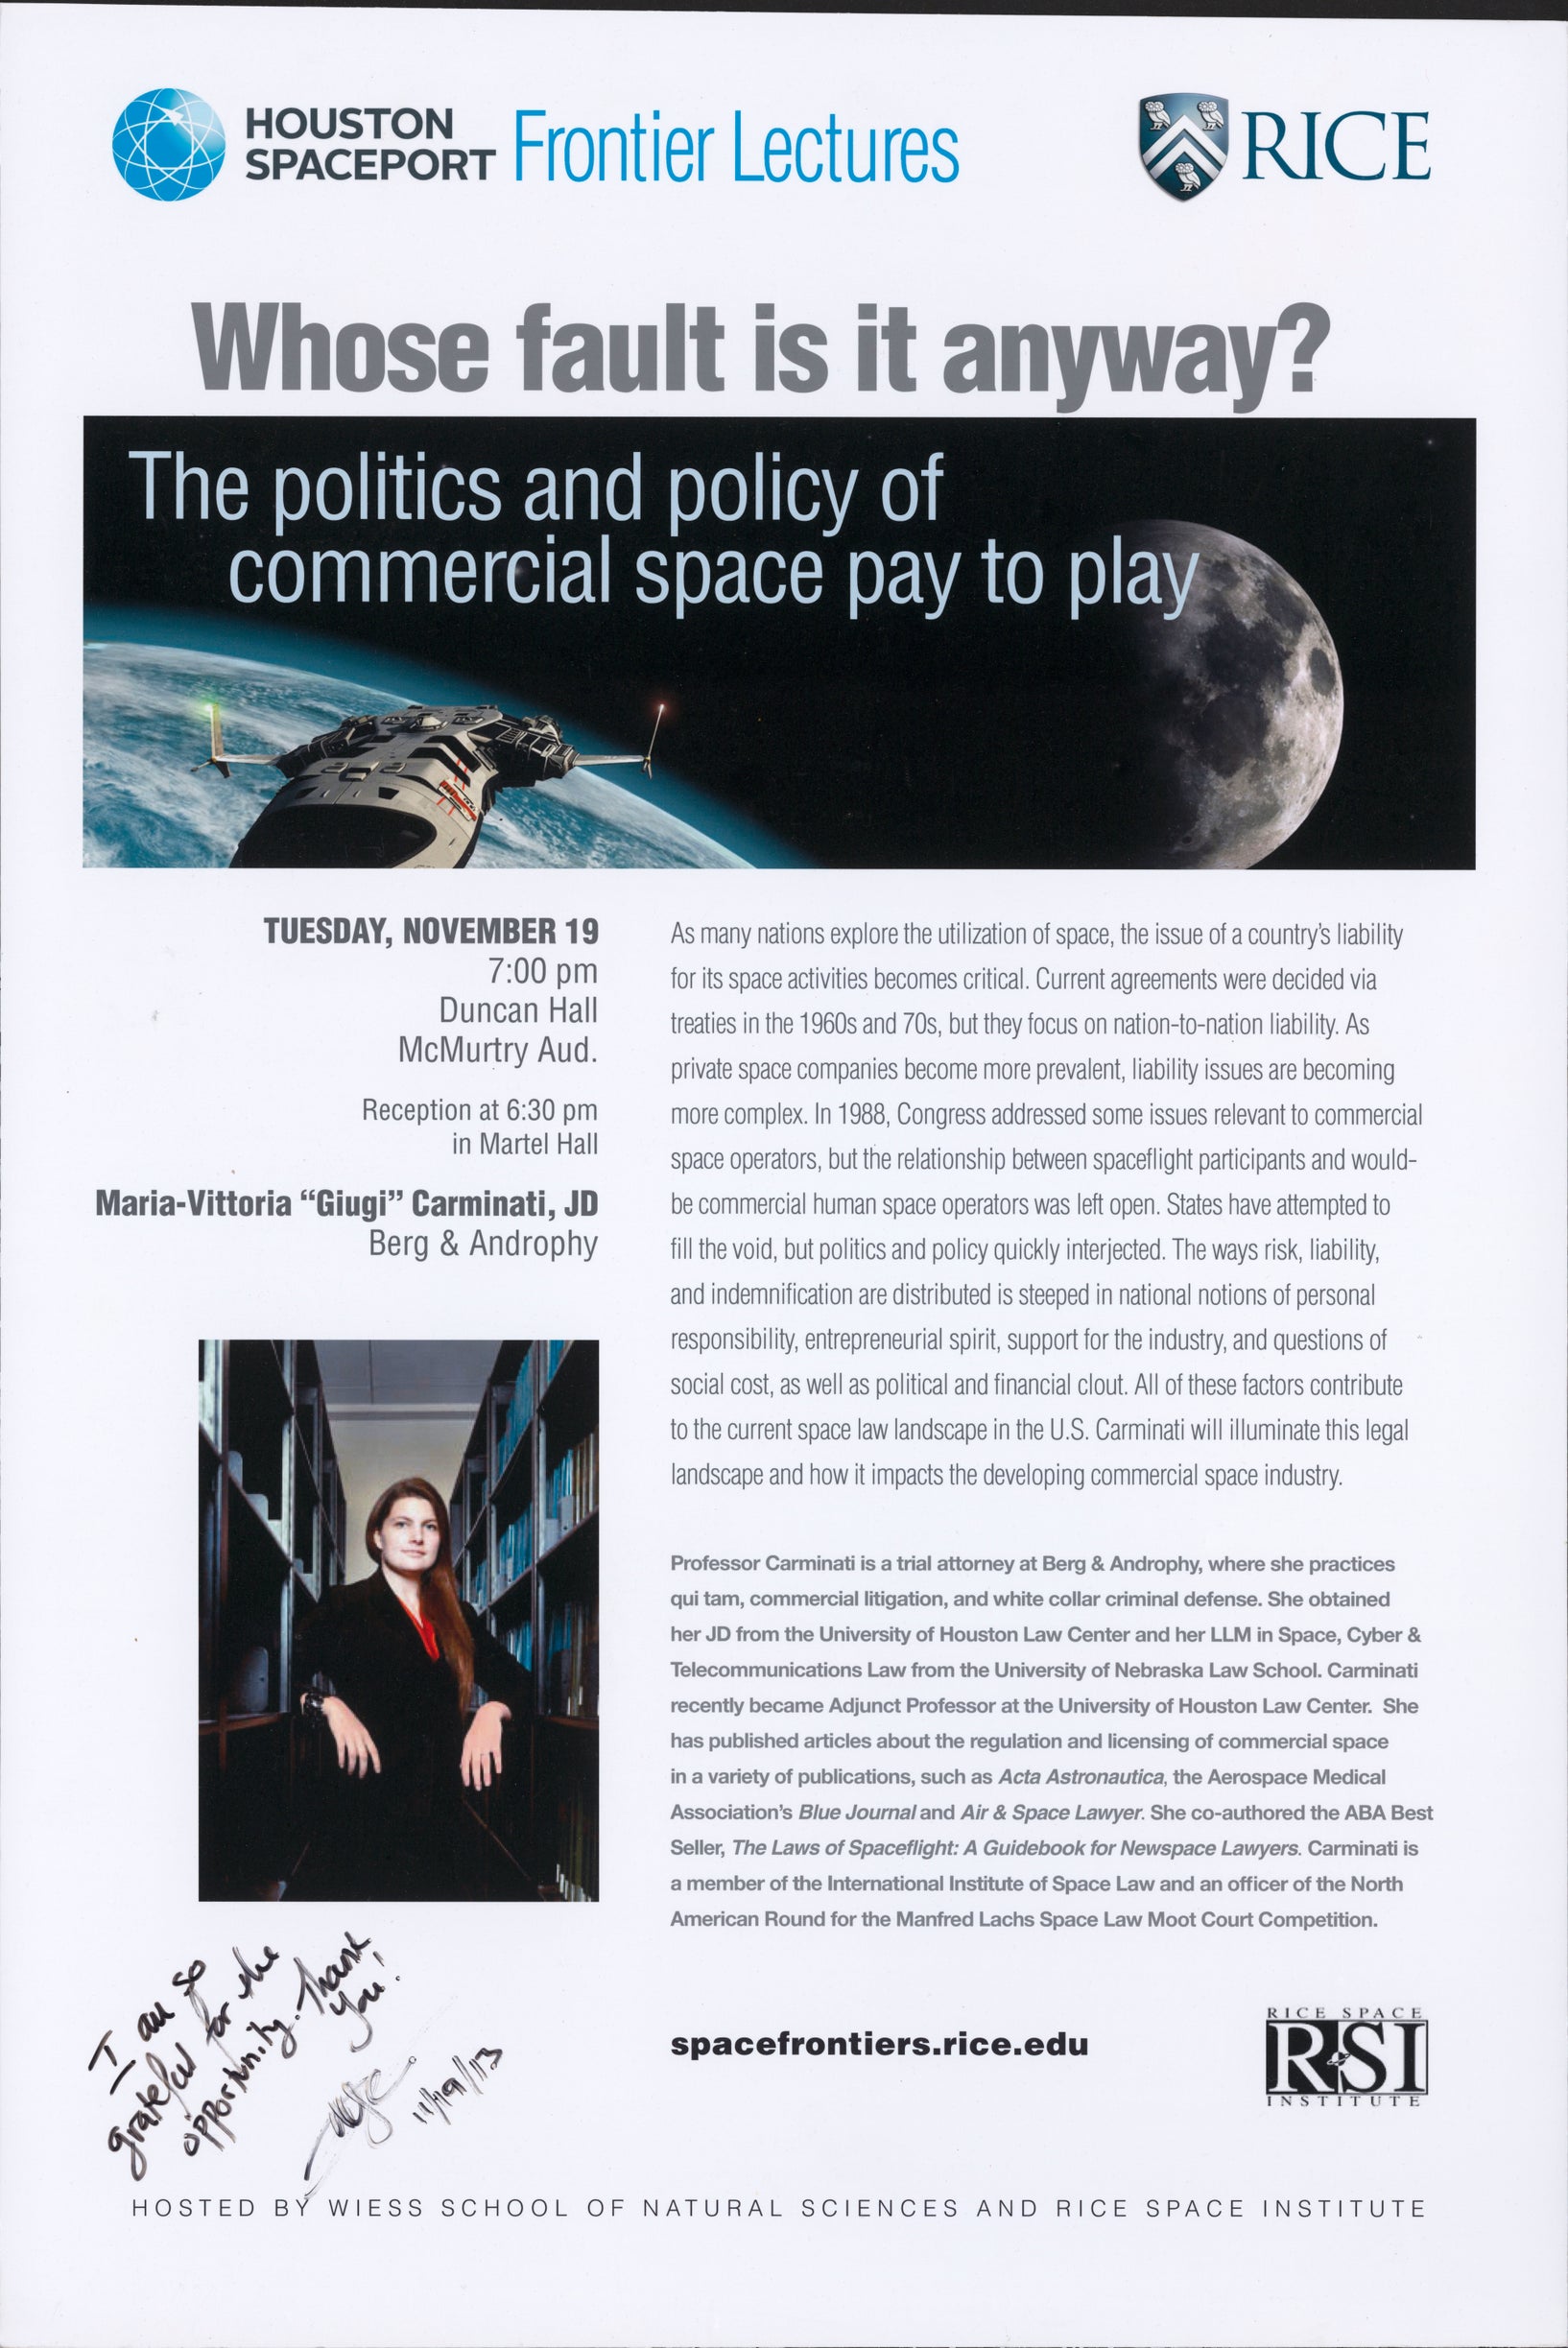 Poster of "Whose fault is it anyway? The policics and policy of commercial space pay to play" by Maria-Vittoria “Giugi” Carminati